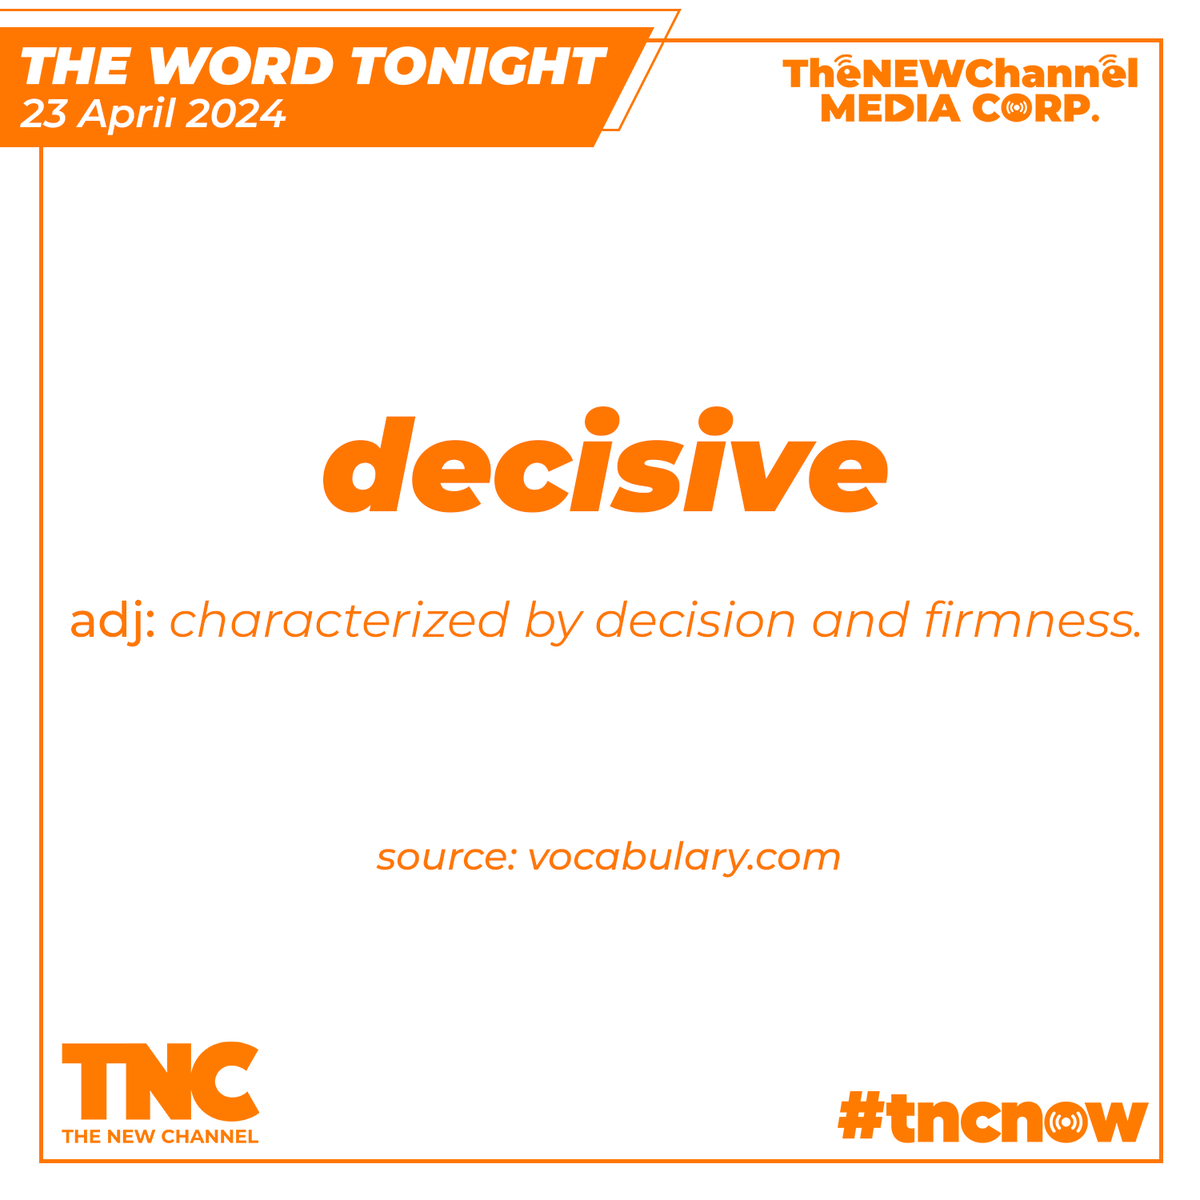 The Word Tonight

23 April 2024

decisive
/decisive/

Adjective

characterized by decision and firmness

an able and decisive young woman

Source: vocabulary.com

#onTNC #decisive #TheWordTonightOnTNC #FYP #ForYouPage #TNCNow #TheNEWChannel #WatchTNCNOW #AllThingsNEW